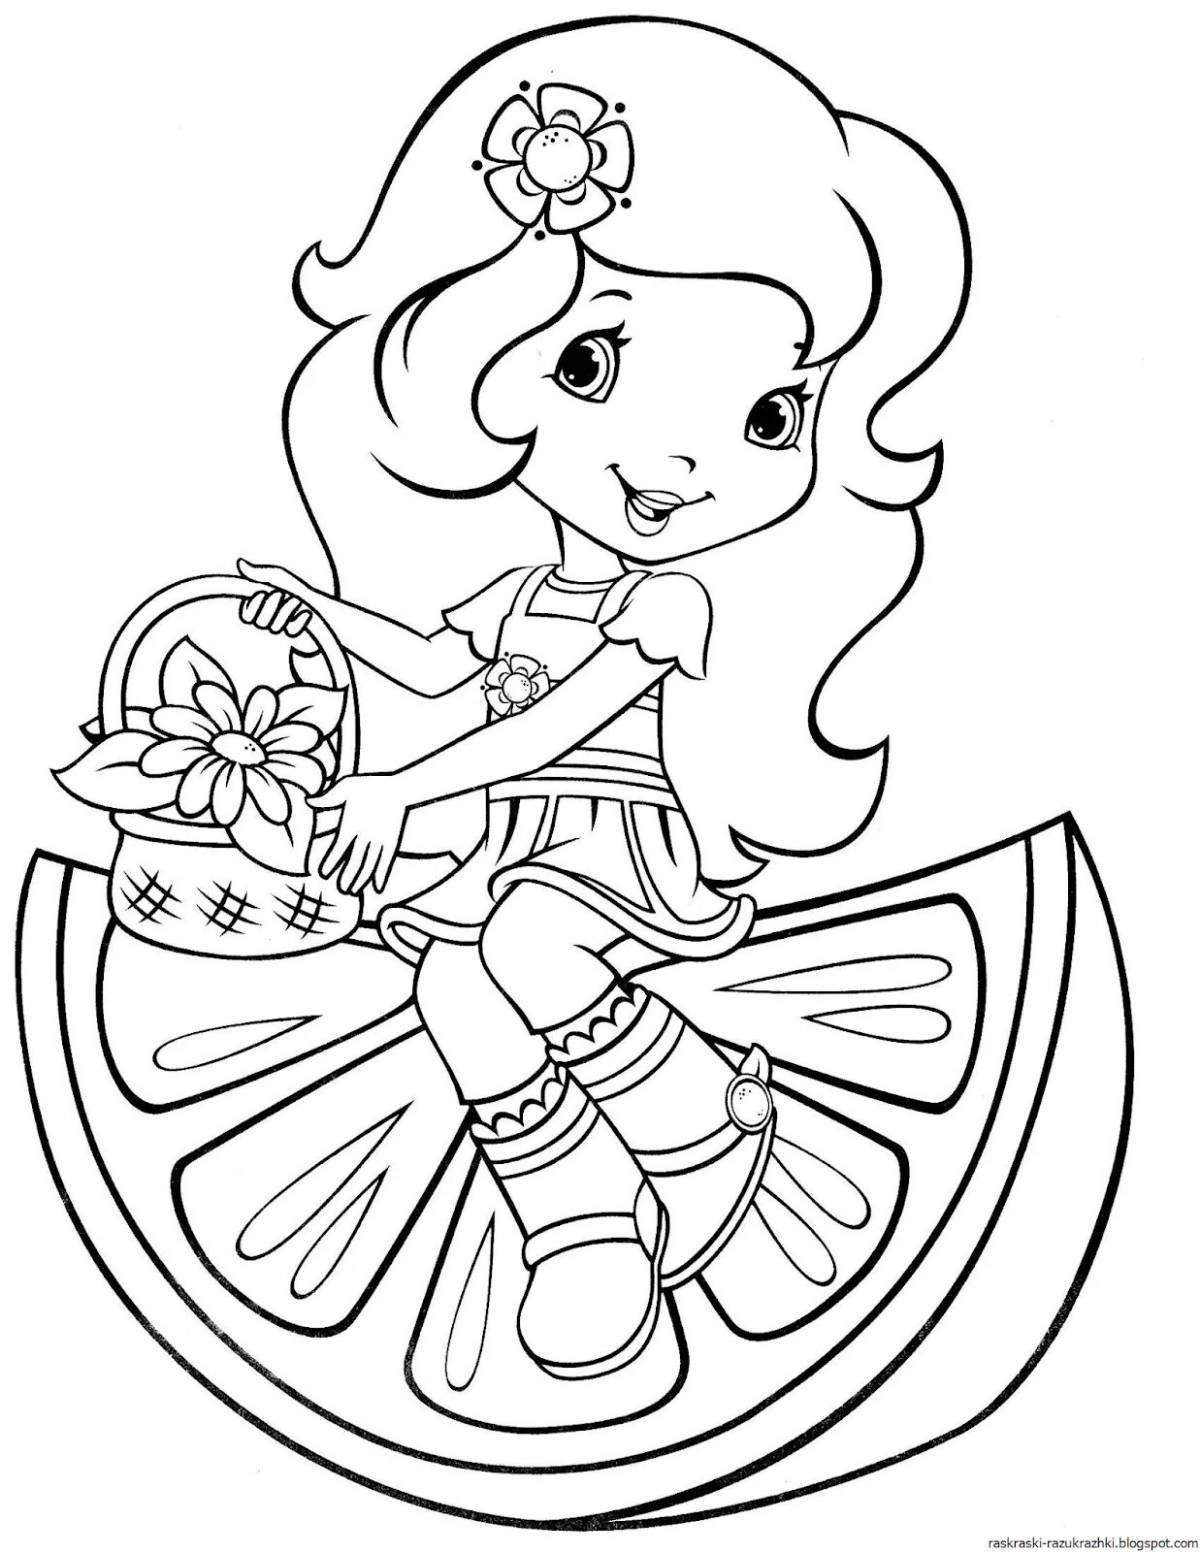 Coloring page hips for girls years old